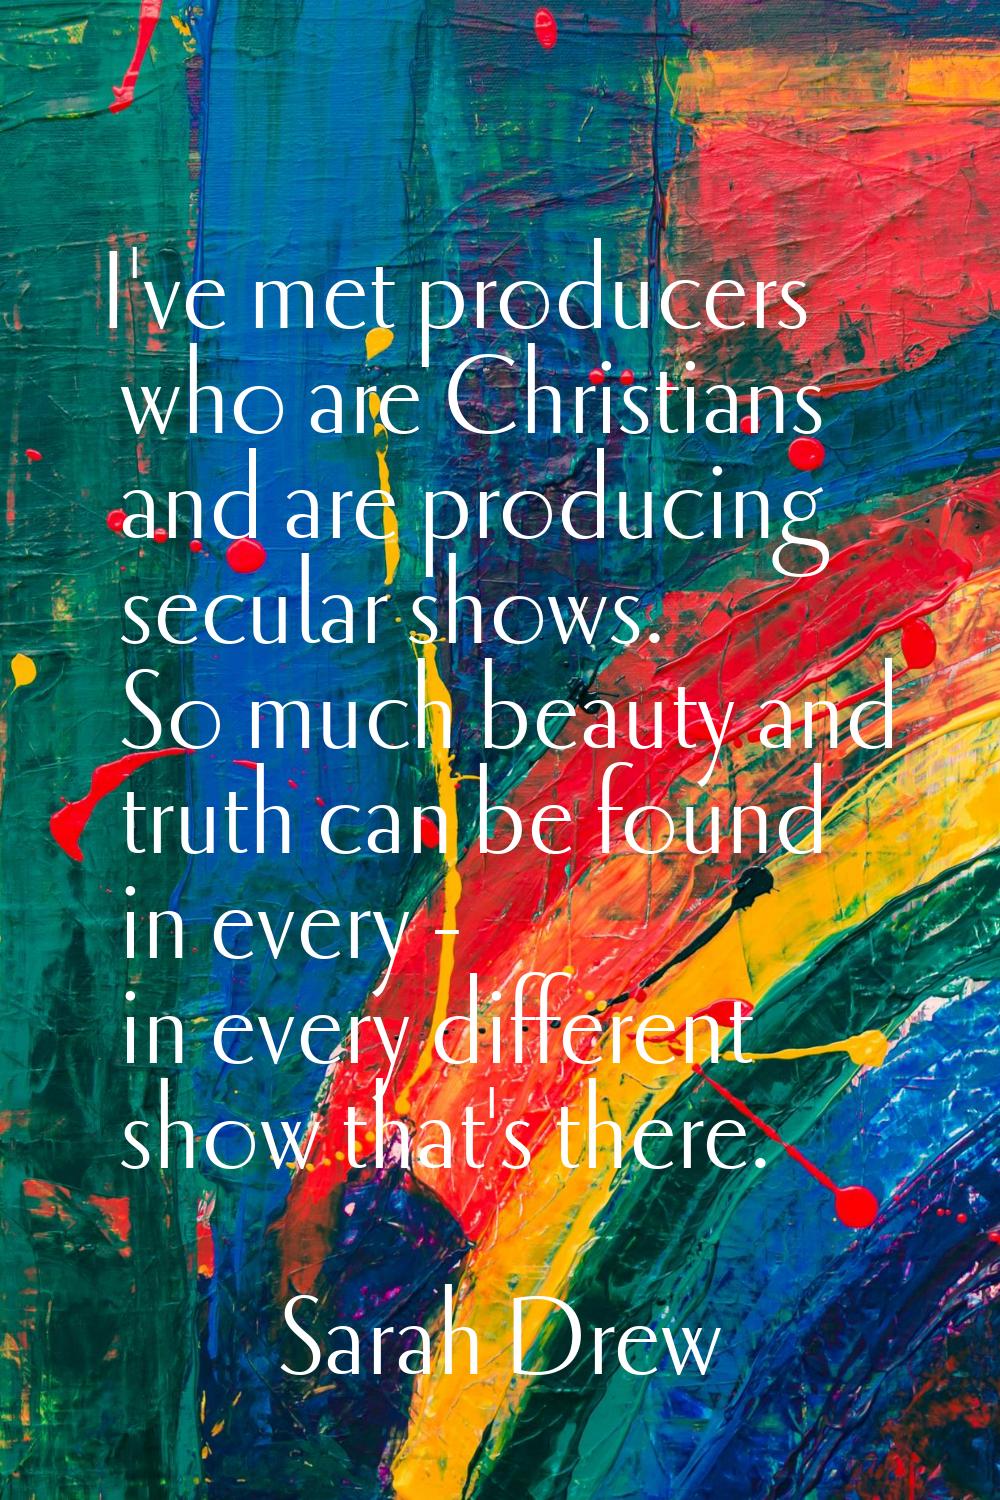 I've met producers who are Christians and are producing secular shows. So much beauty and truth can